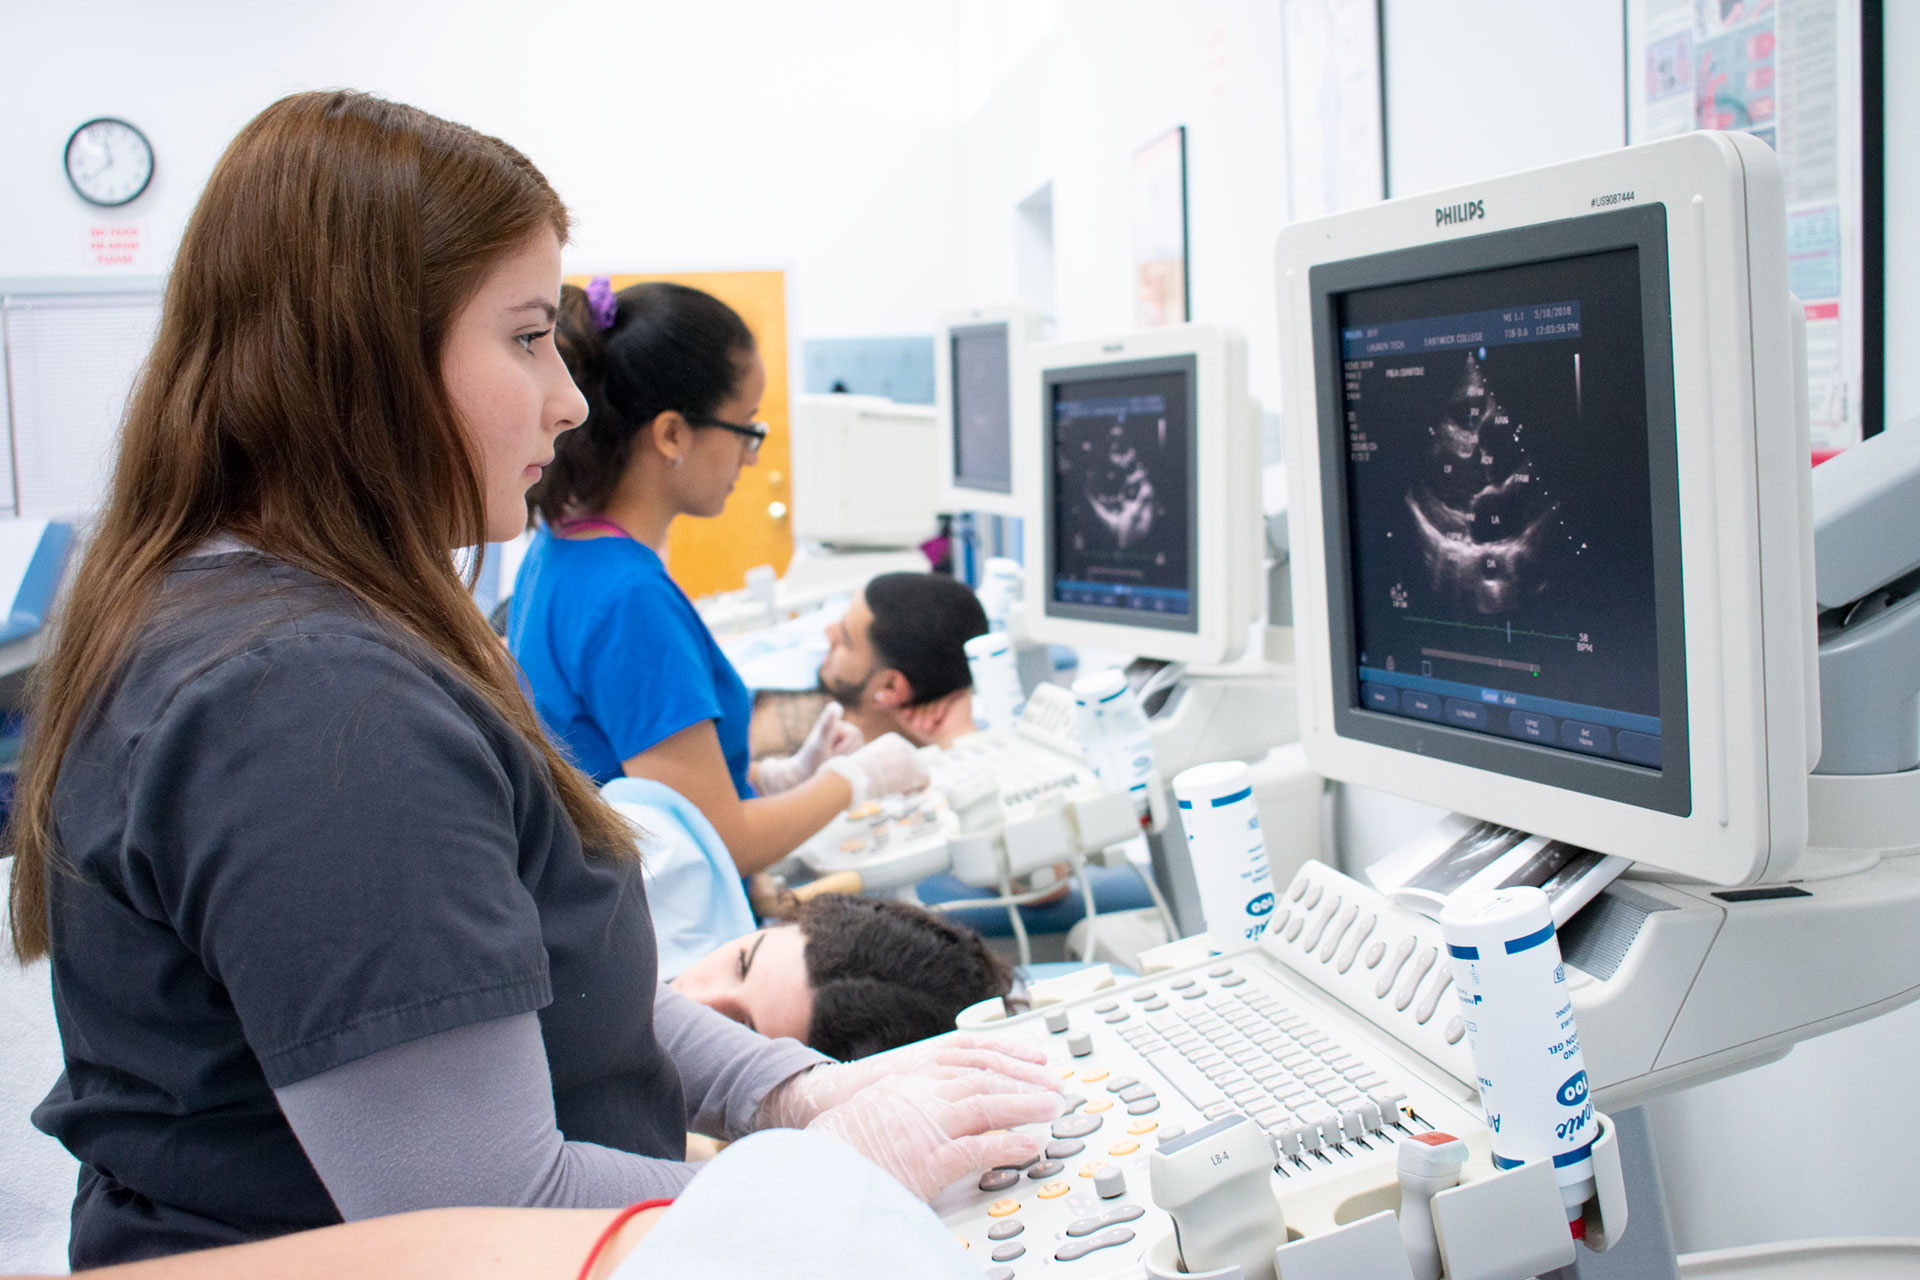 Sonography students practice using ultrasound machines